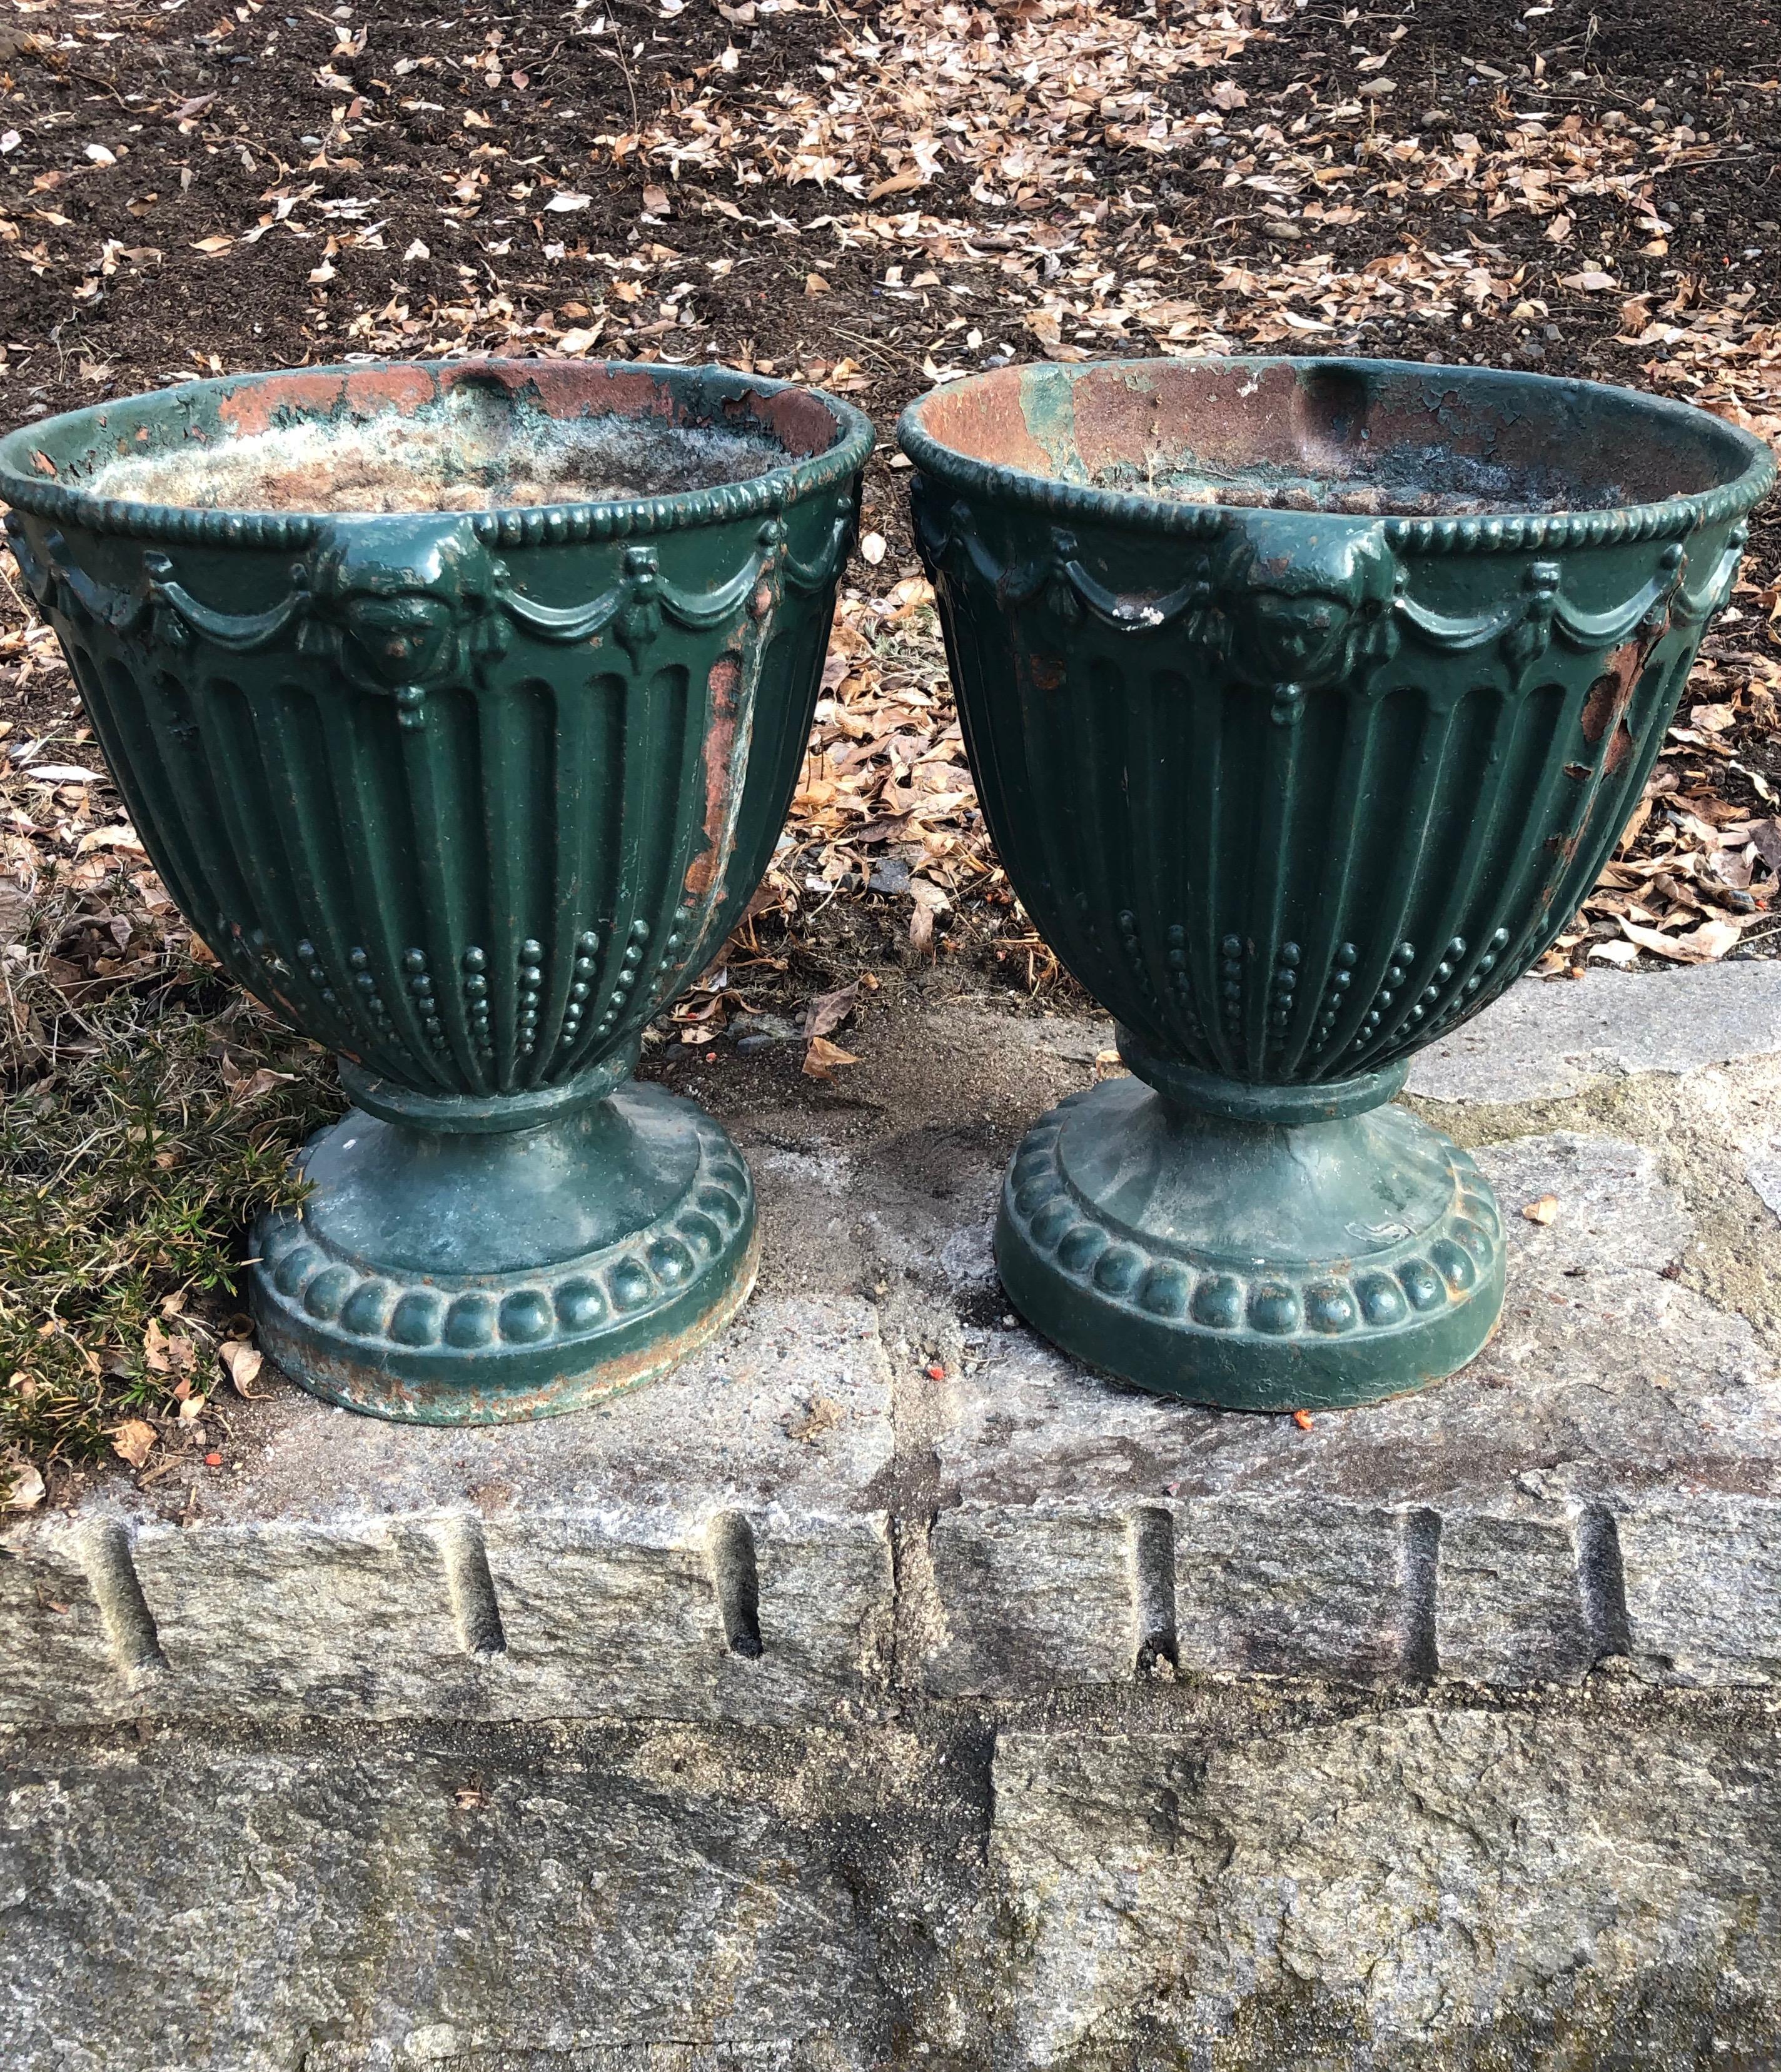 French Pair of Small 19th Century Cast Iron Adams Urns in Old Green Paint